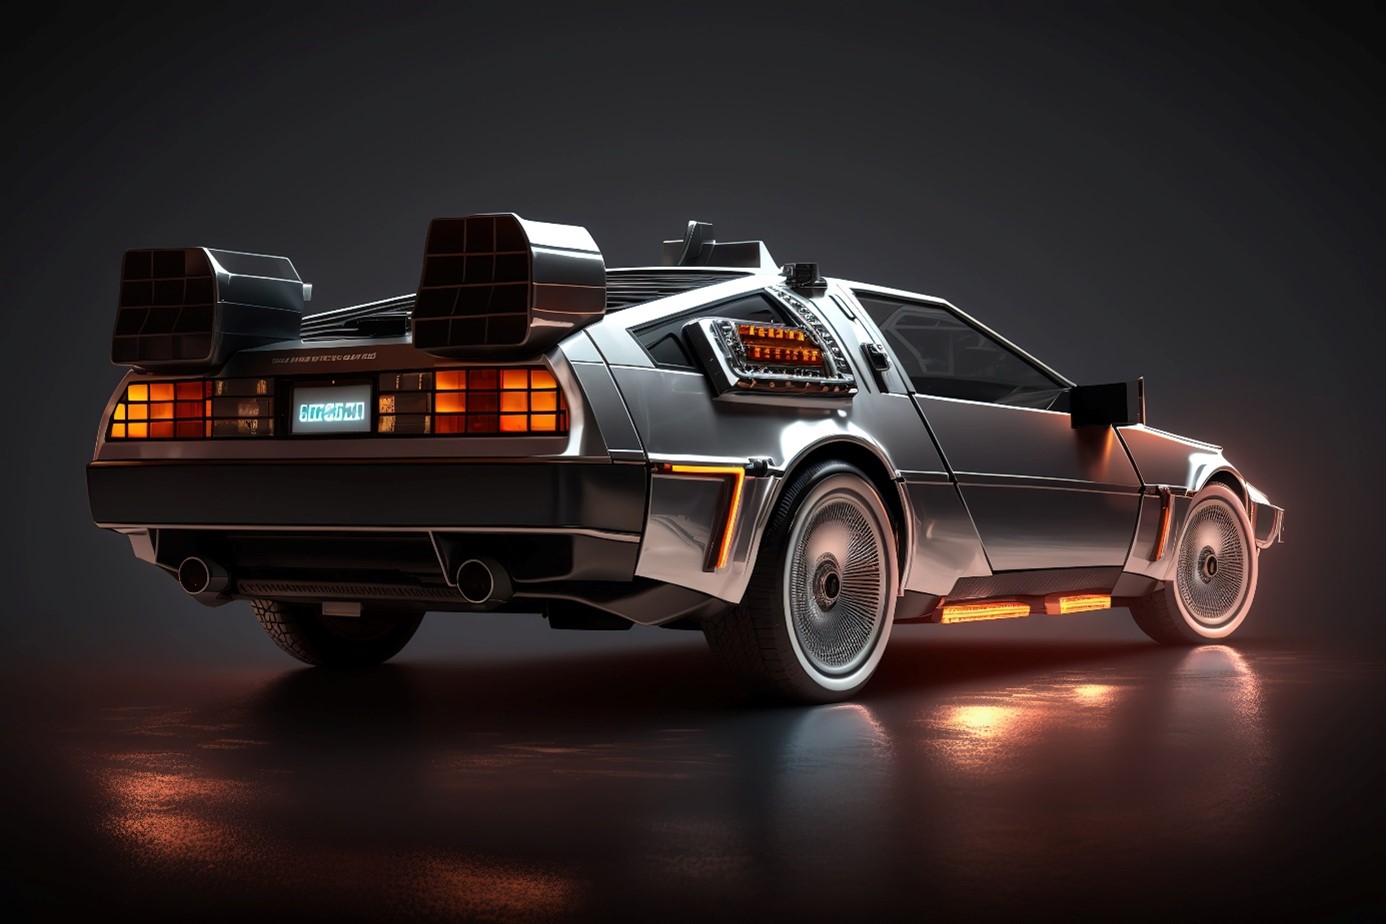 De Lorean vehicle from back to the future in all it's splendor